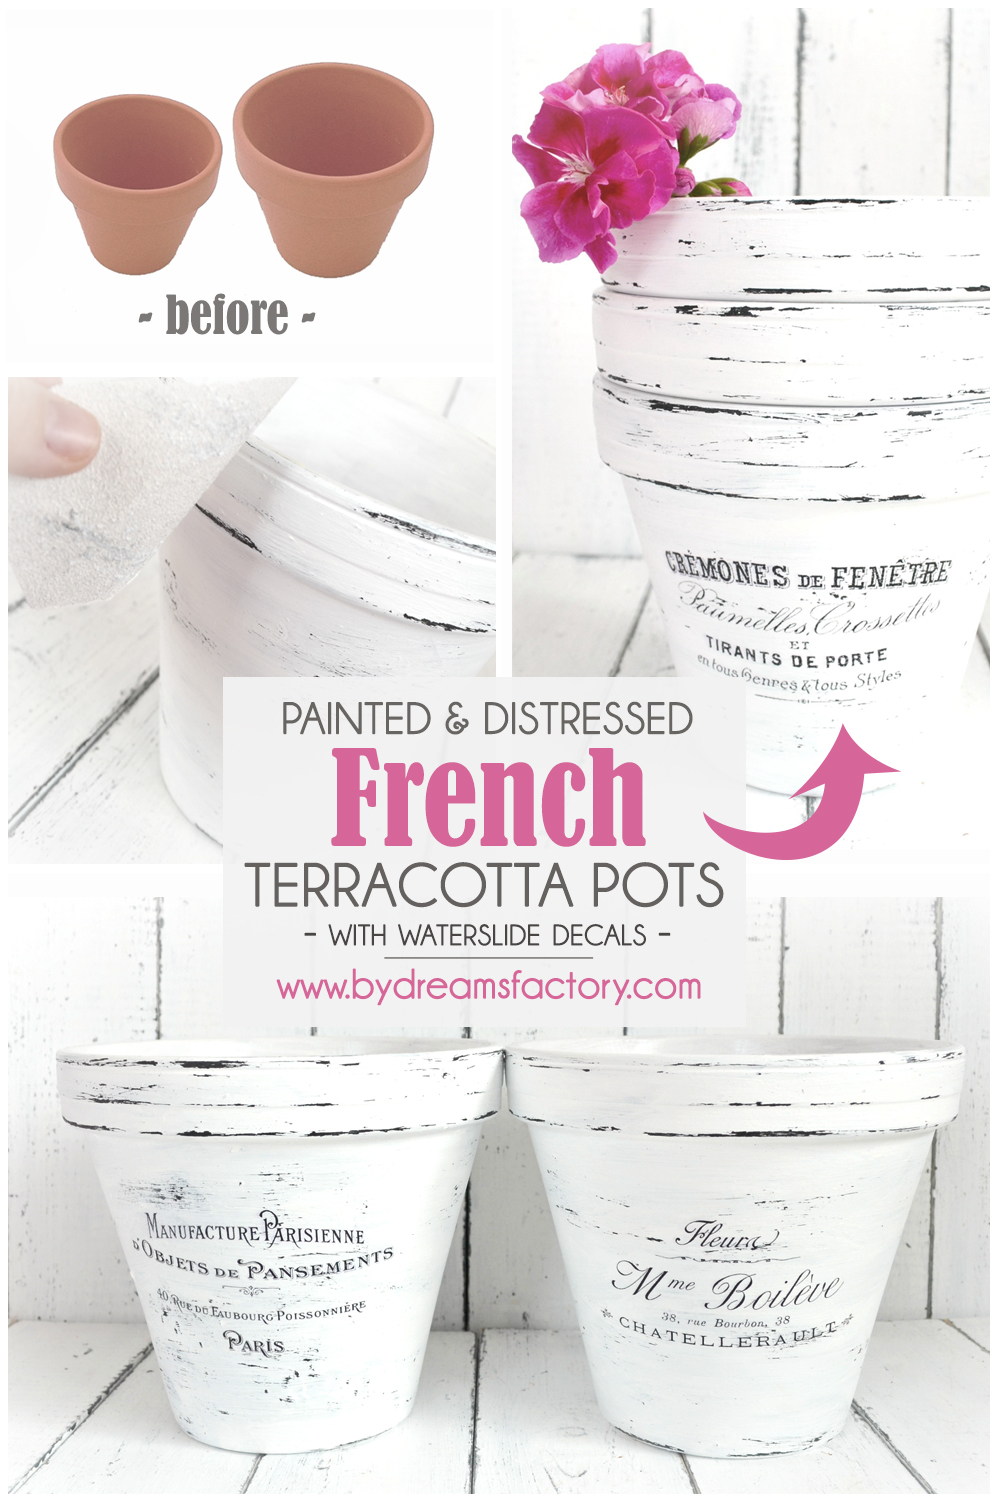 DIY Painted and distressed French Terracotta Pots - Dreams Factory